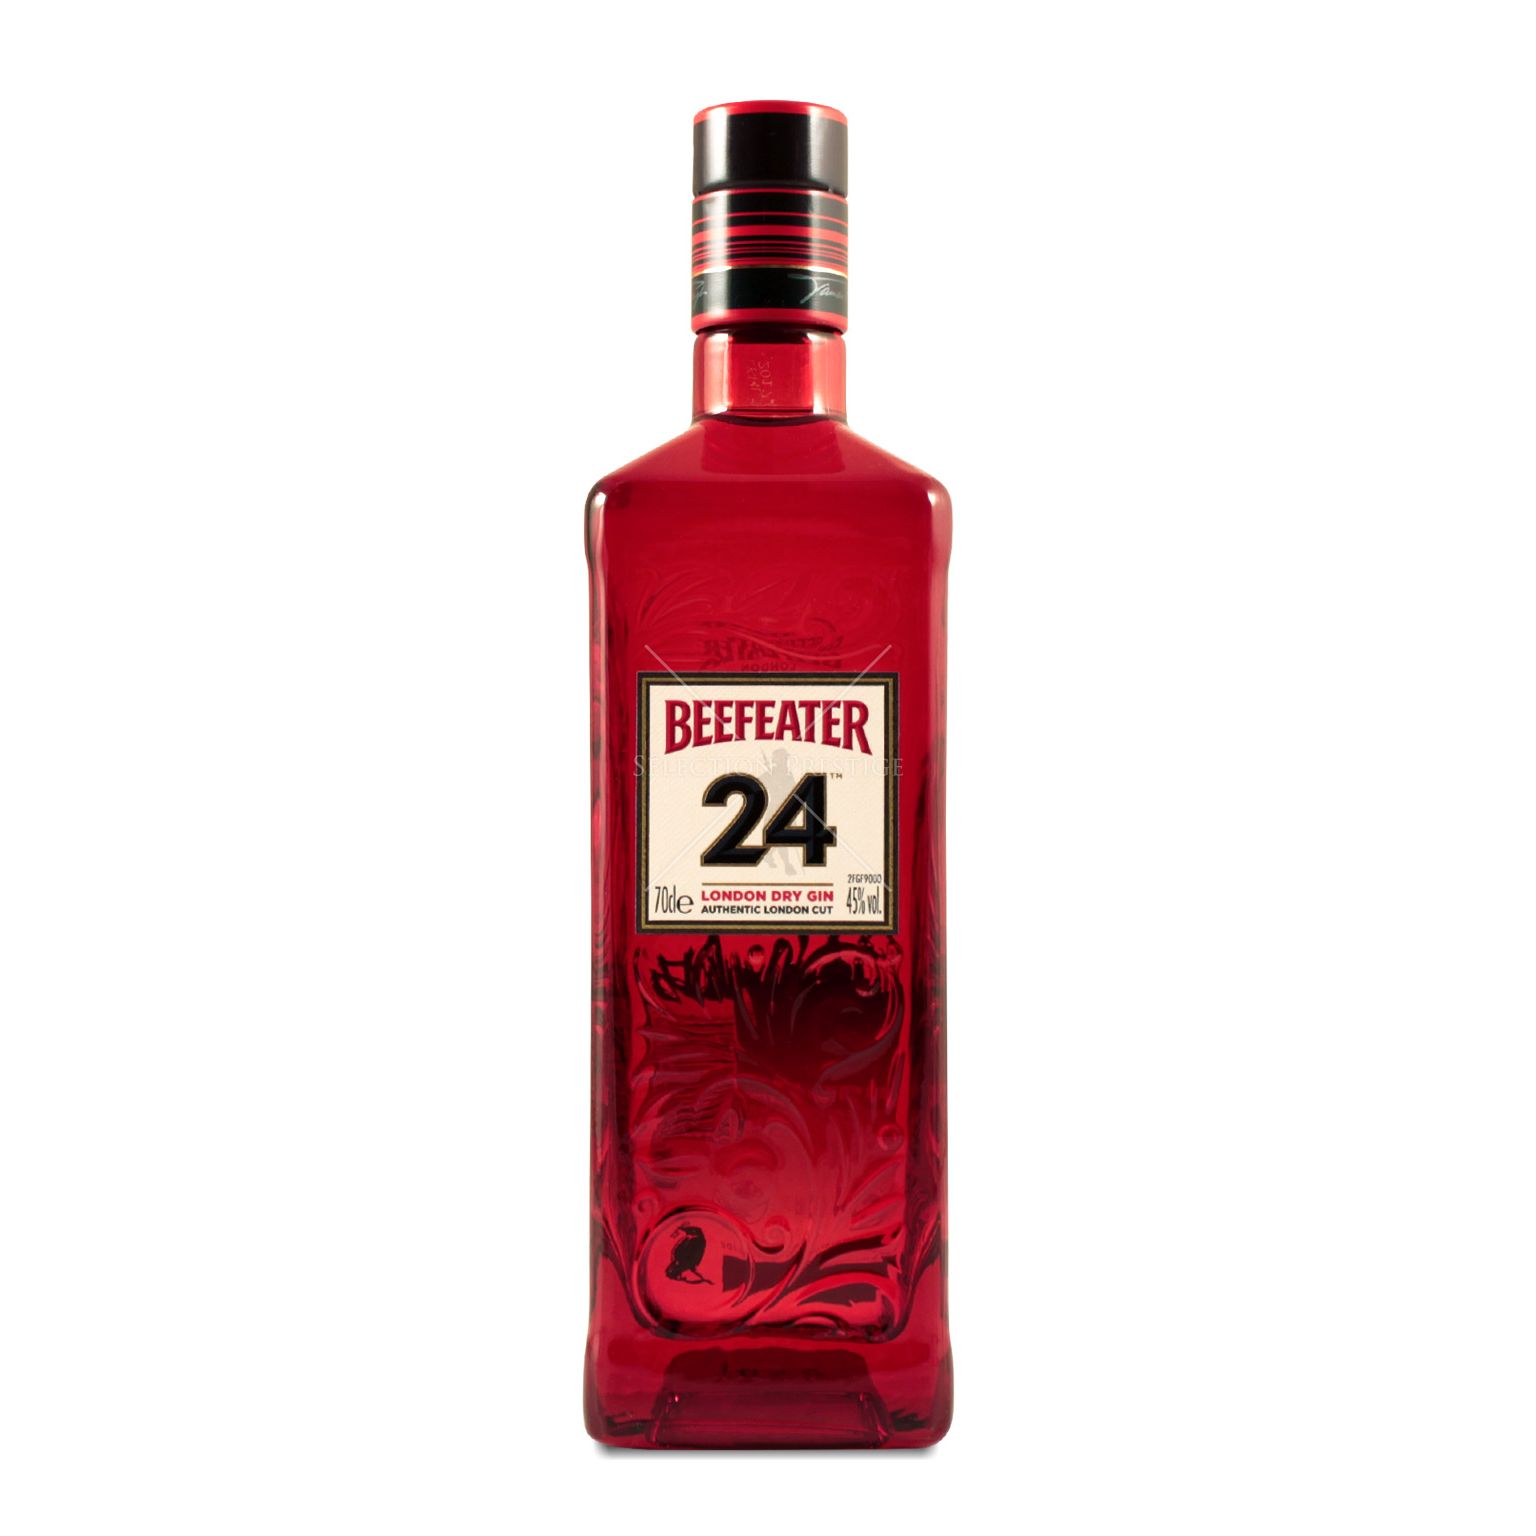 Beefeater "24" (1.00L)  